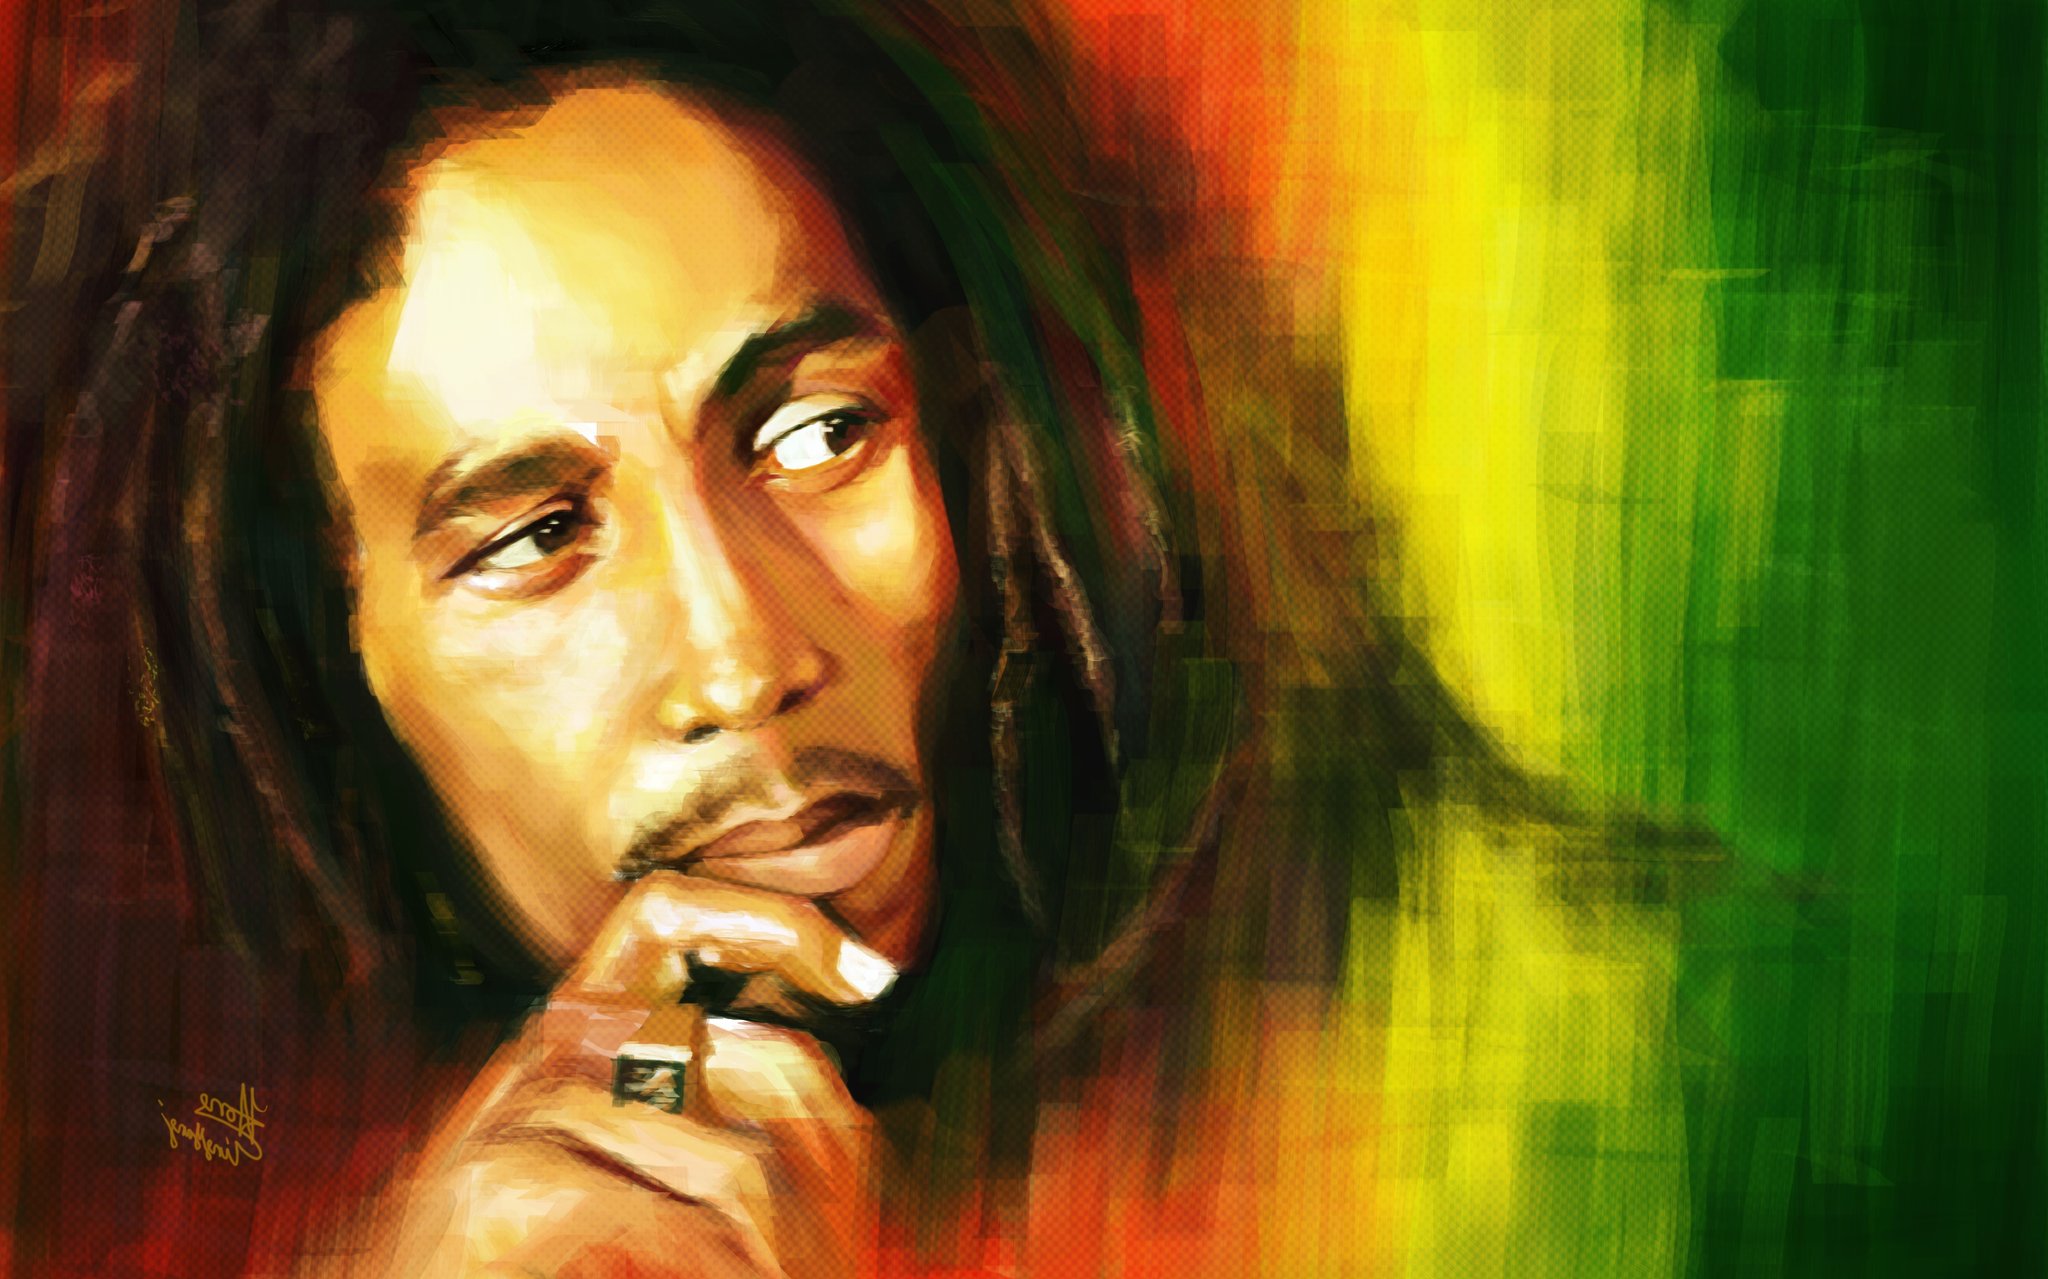 As it was in the beginning; One Love!
So shall it be in the end; One Heart!
Happy Birthday Bob Marley   